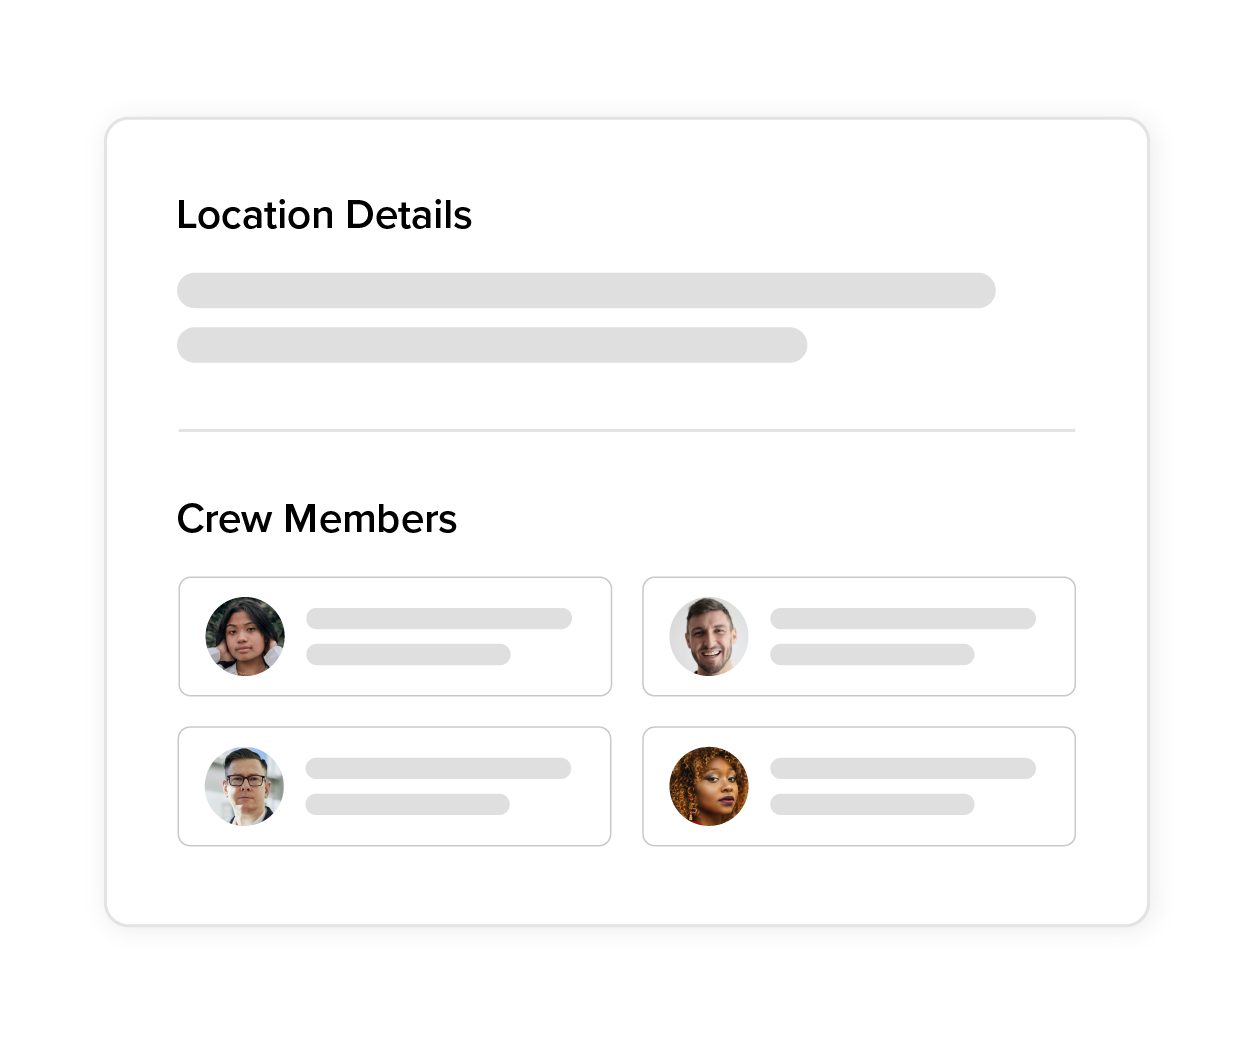 A screen displaying the location details for a group of people involved in video production services.